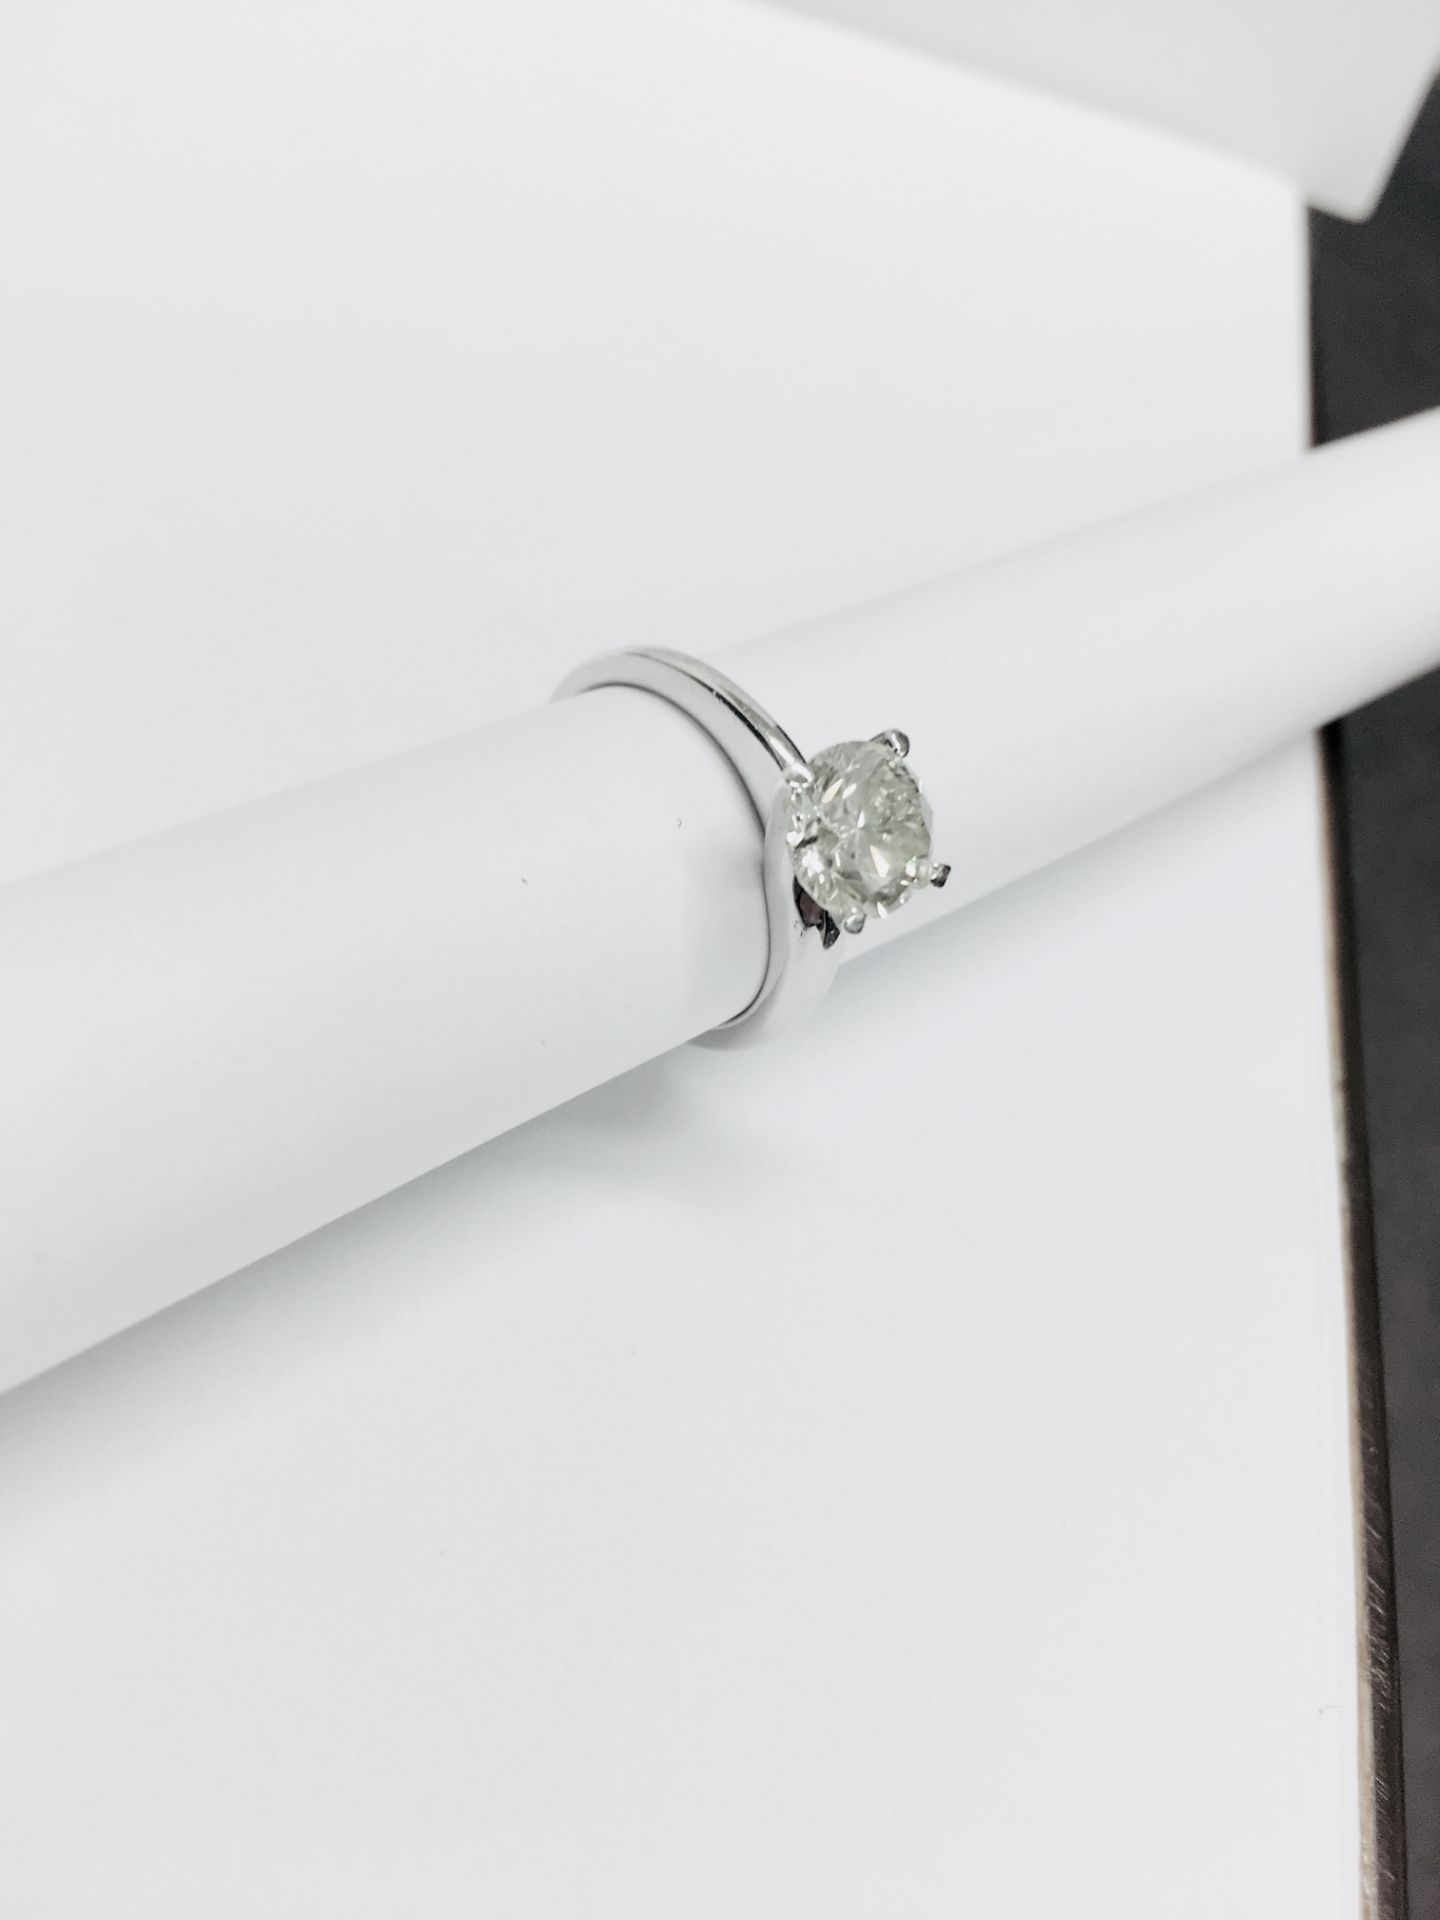 2.16ct diamond aolitaire ring set in 18ct white gold. M colour and si3 clarity. High 4 claw setting, - Image 6 of 6